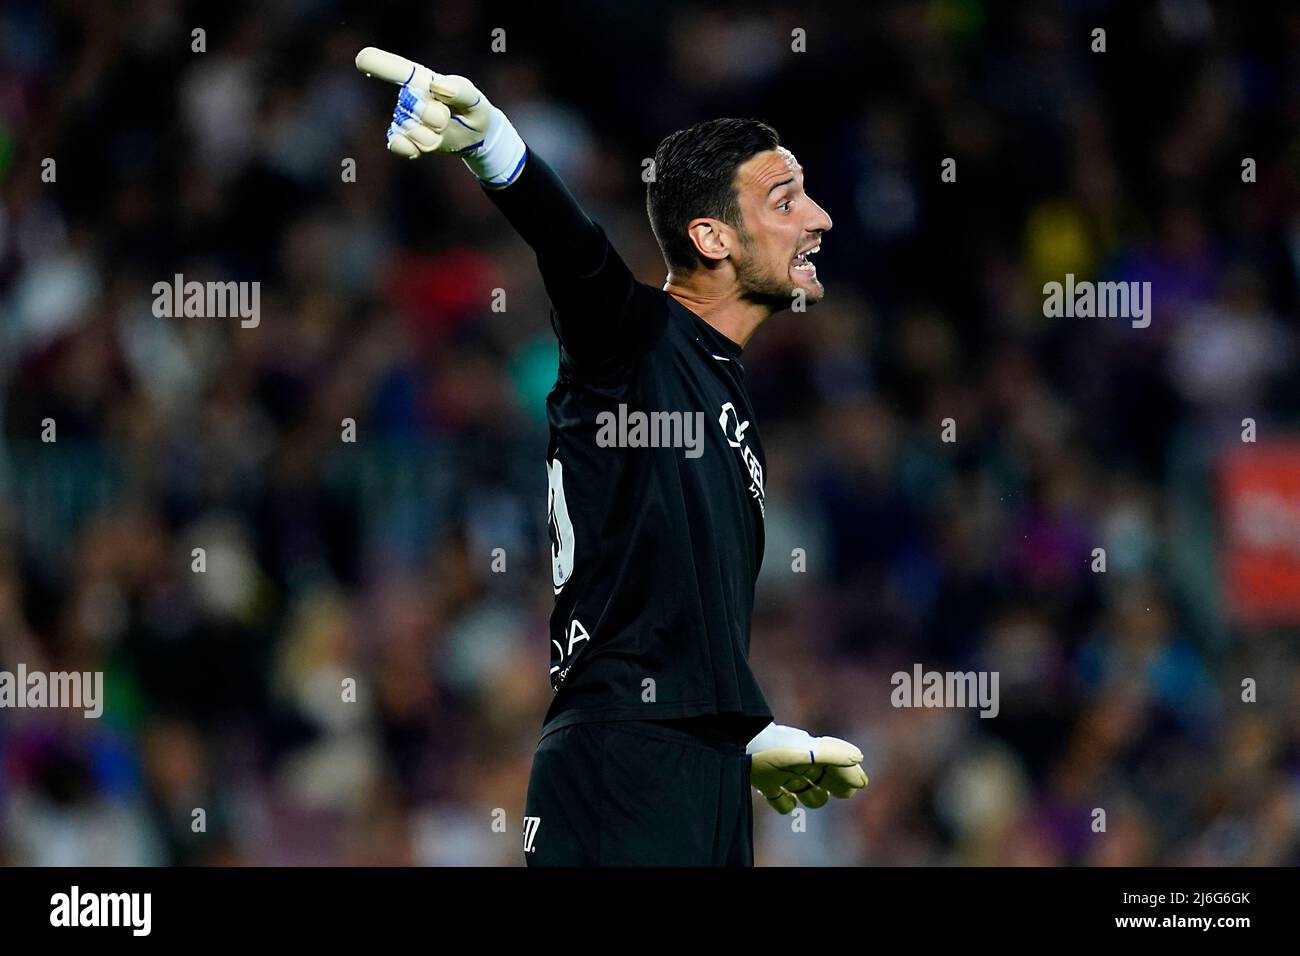 Barcelona, Spain. 01st May, 2022. Sergio Rico of RCD Mallorca during the La Liga match between FC Barcelona and RCD Mallorca played at Camp Nou Stadium on May 01, 2022 in Barcelona, Spain. (Photo by Sergio Ruiz / PRESSINPHOTO ) Credit: PRESSINPHOTO SPORTS AGENCY/Alamy Live News Stock Photo